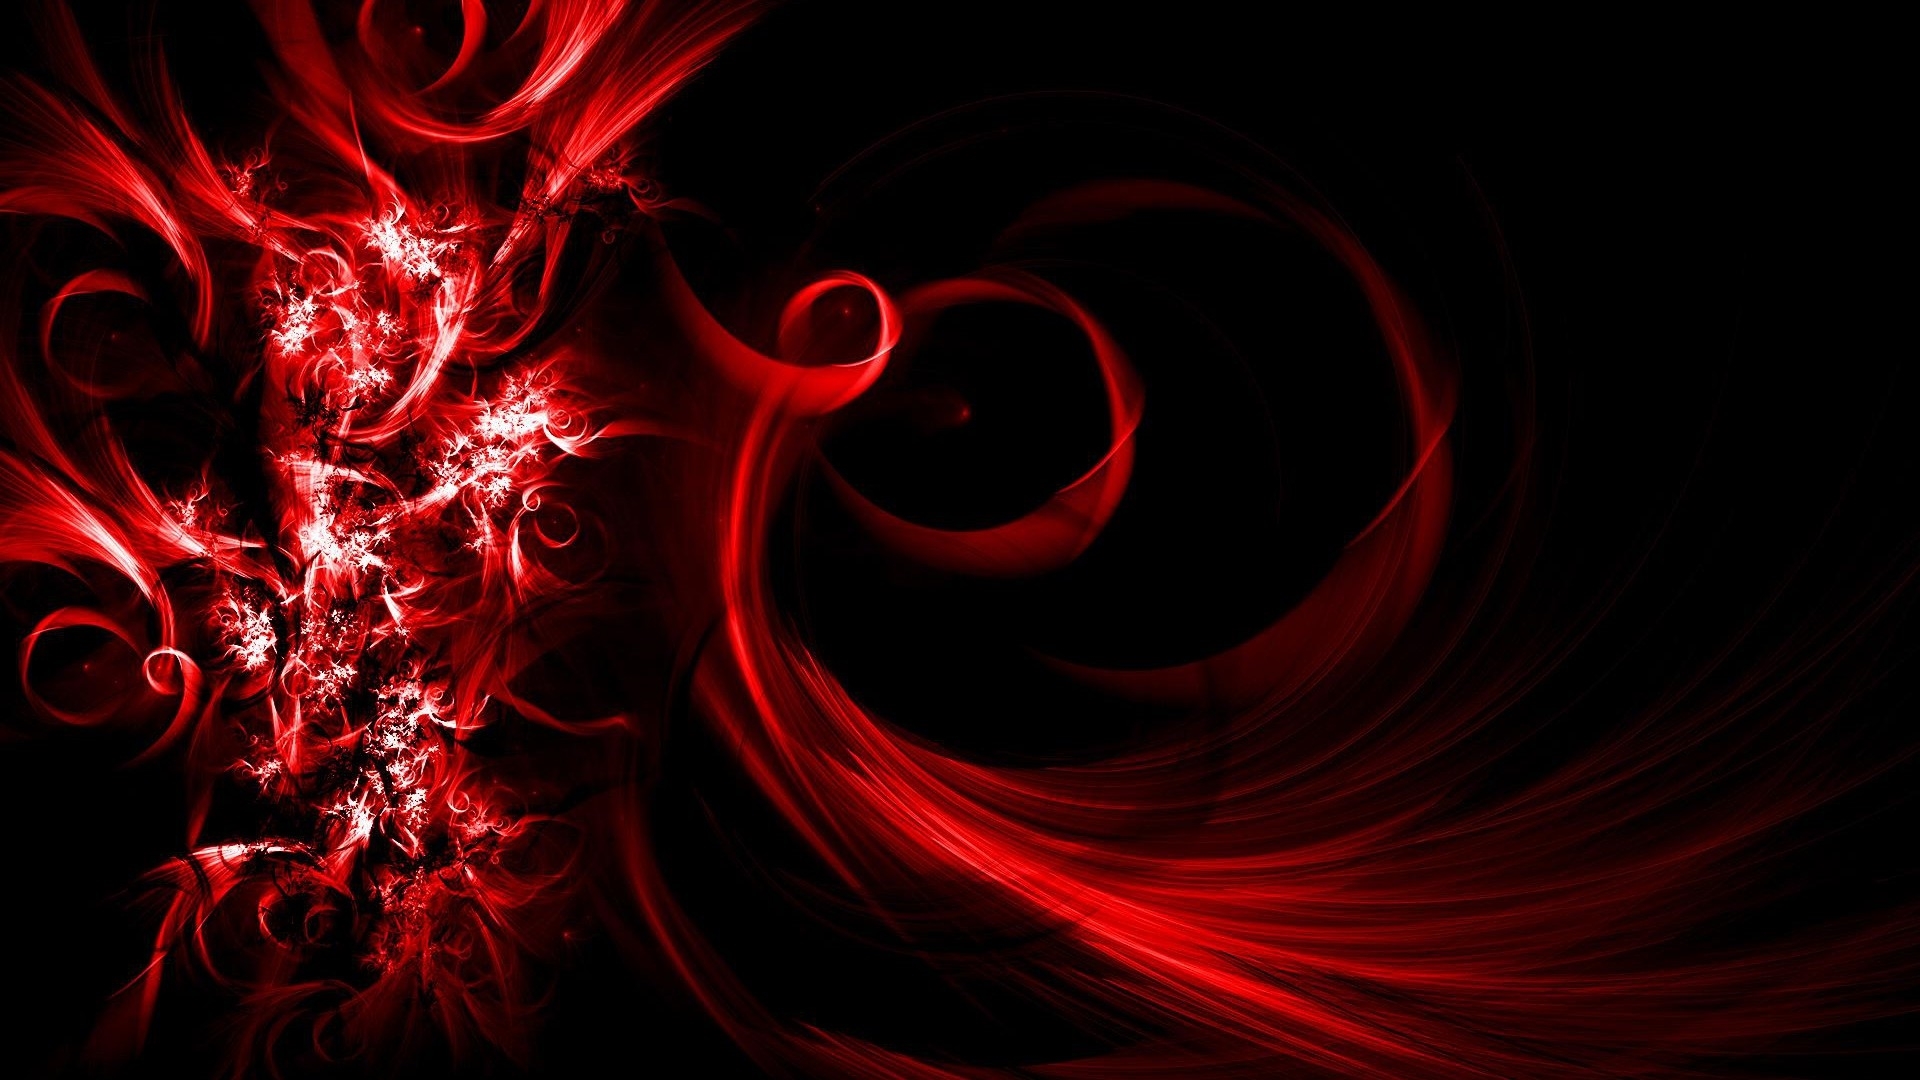 72+ Red Abstract Background Jpg Pictures - MyWeb